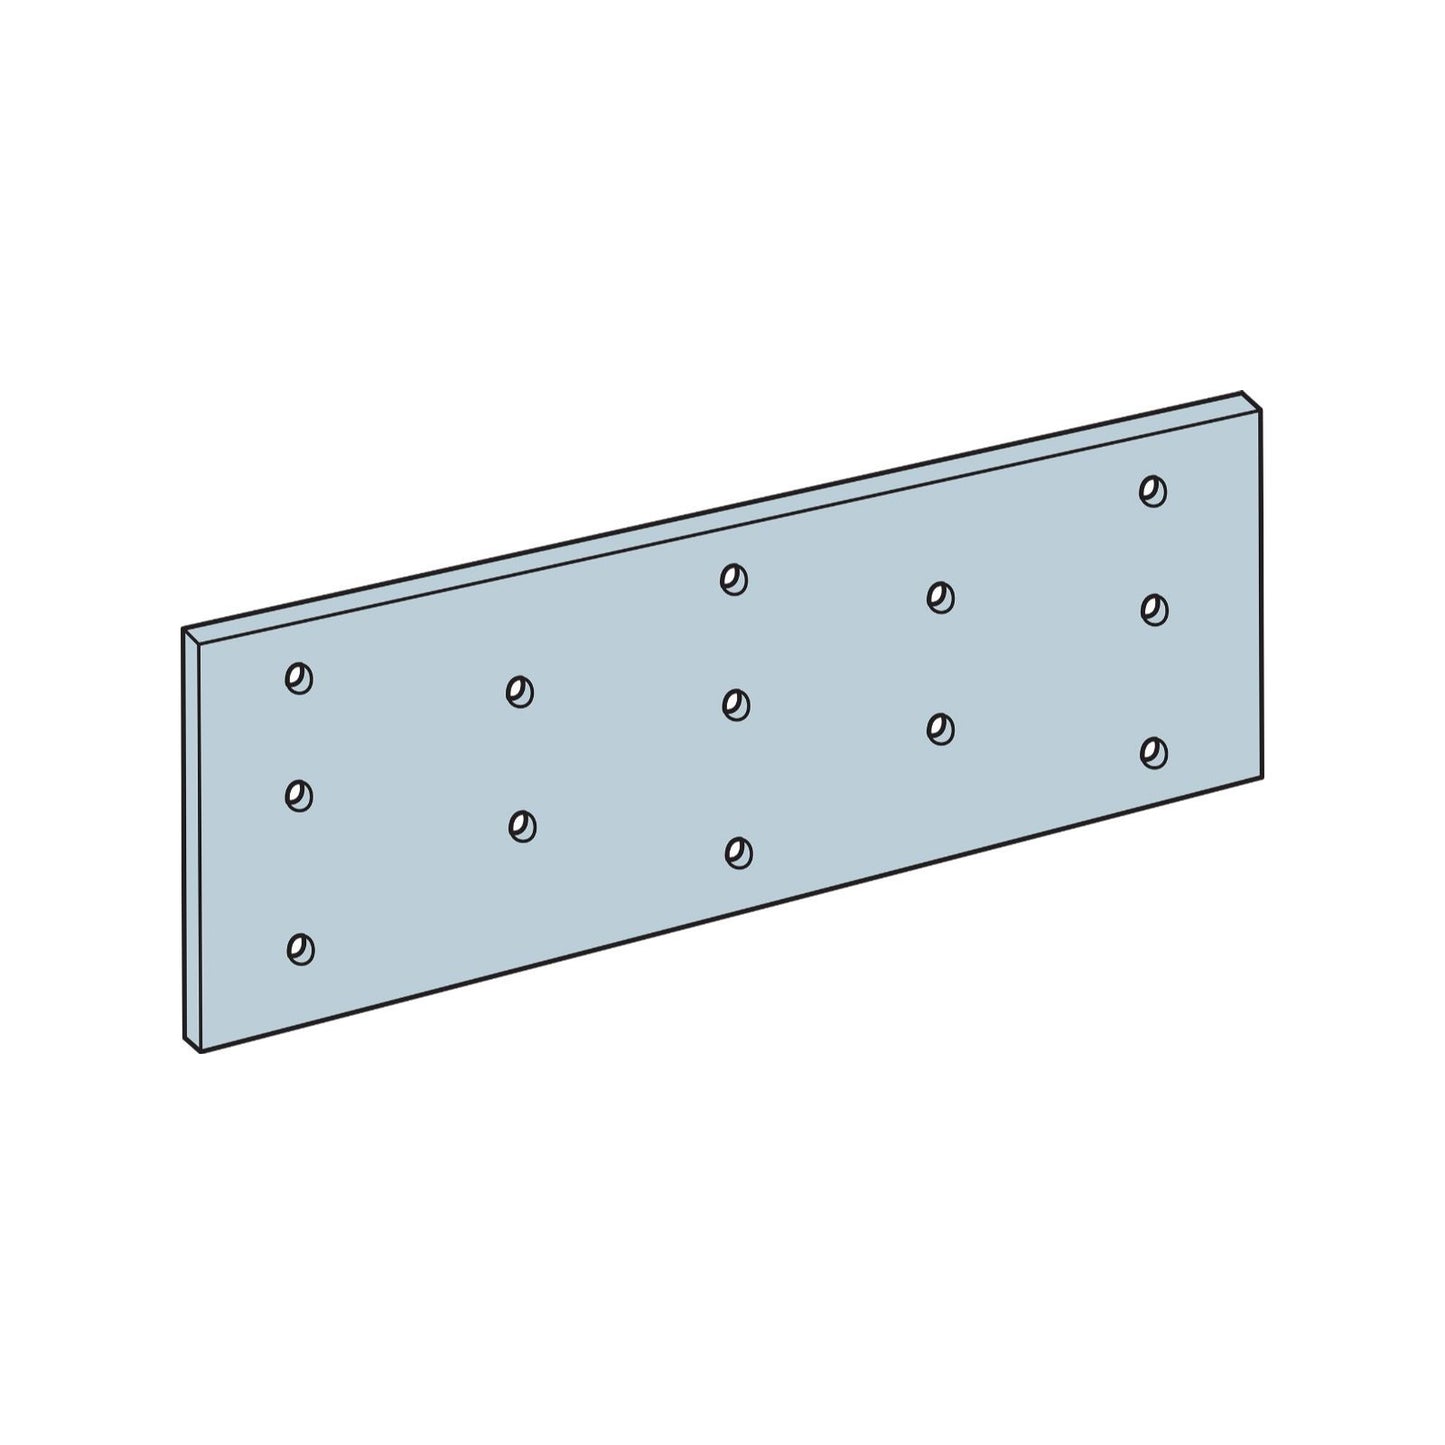 Simpson TP15 11316 inch x 5 inch Tie Plate G90 Galvanized image 1 of 3